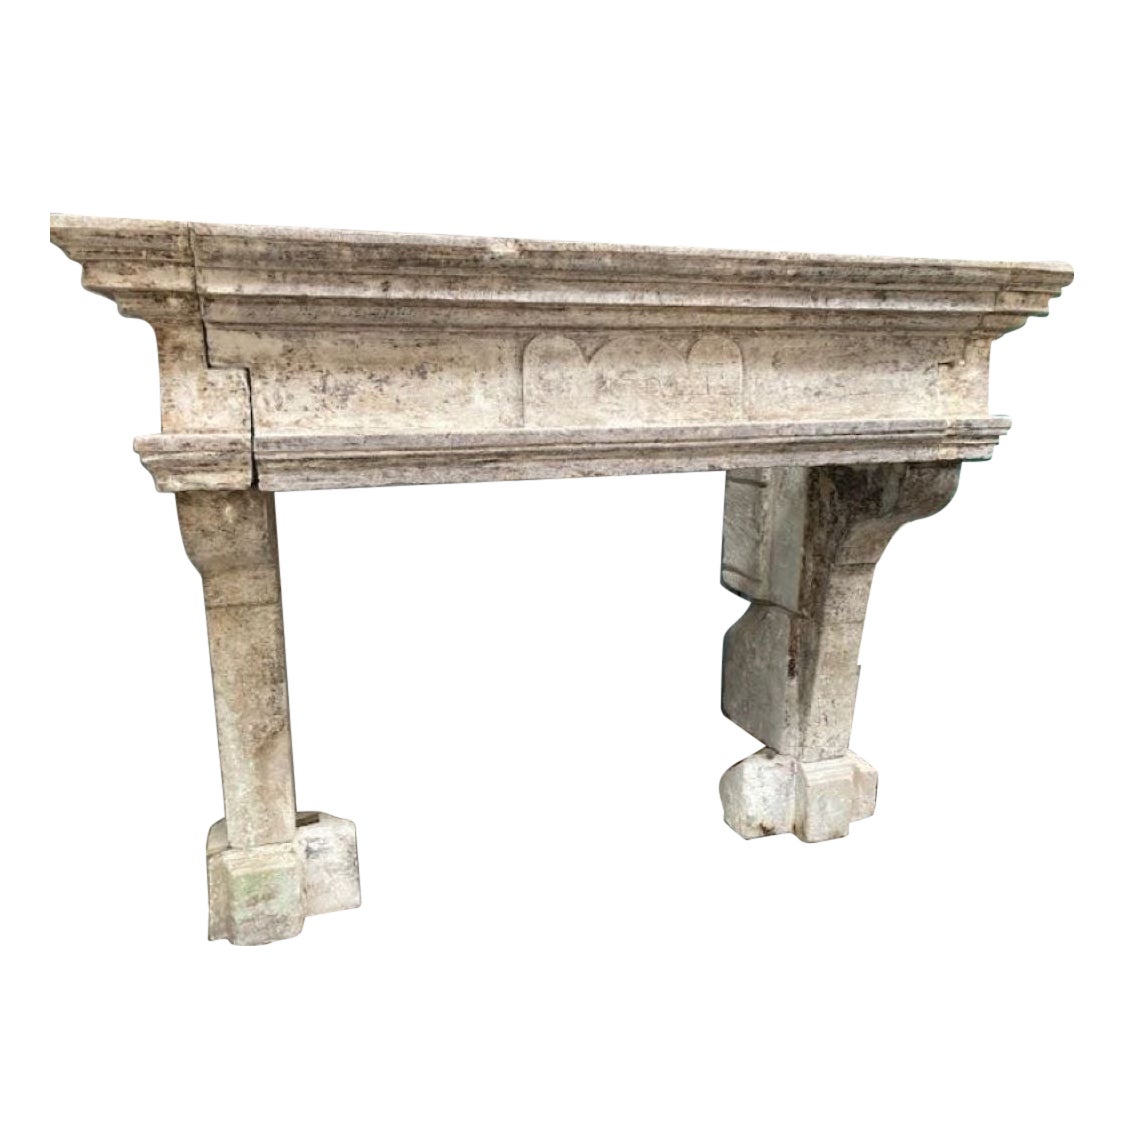 Early 18th Century Limestone Fireplace Mantel with Date Inscription '1713' For Sale